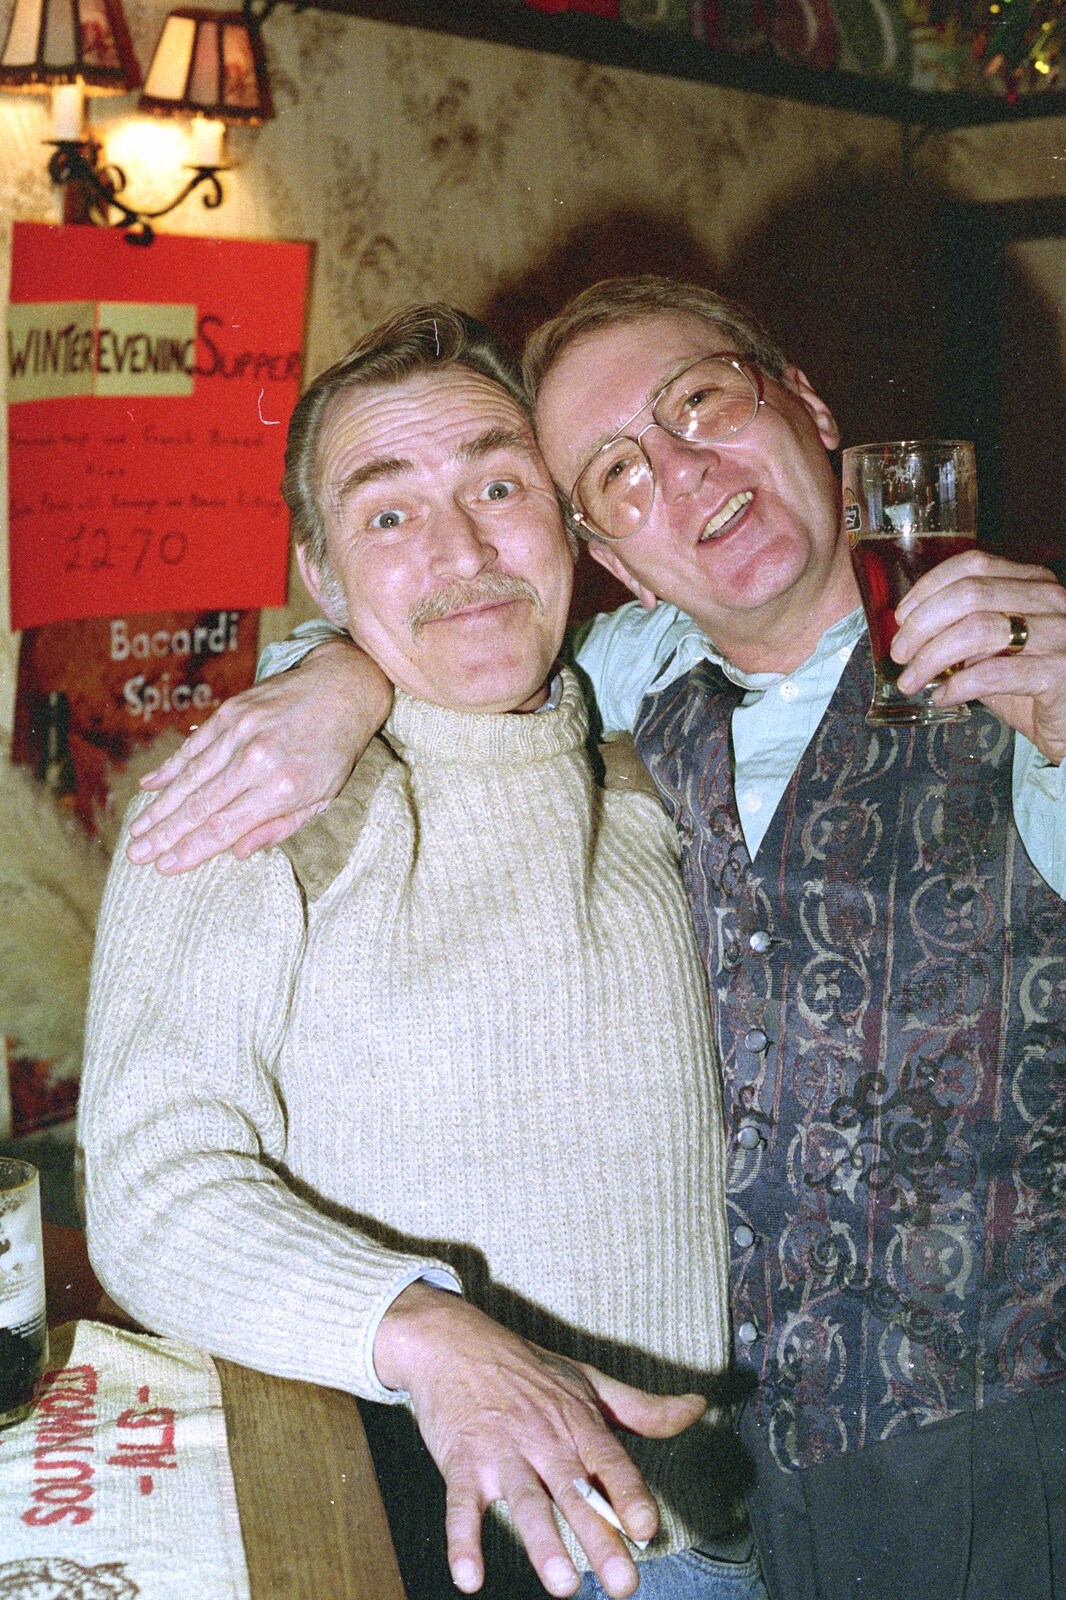 Tony T-Shirt and John Willy from New Year's Eve in the Swan Inn, Brome, Suffolk - 31st December 1995